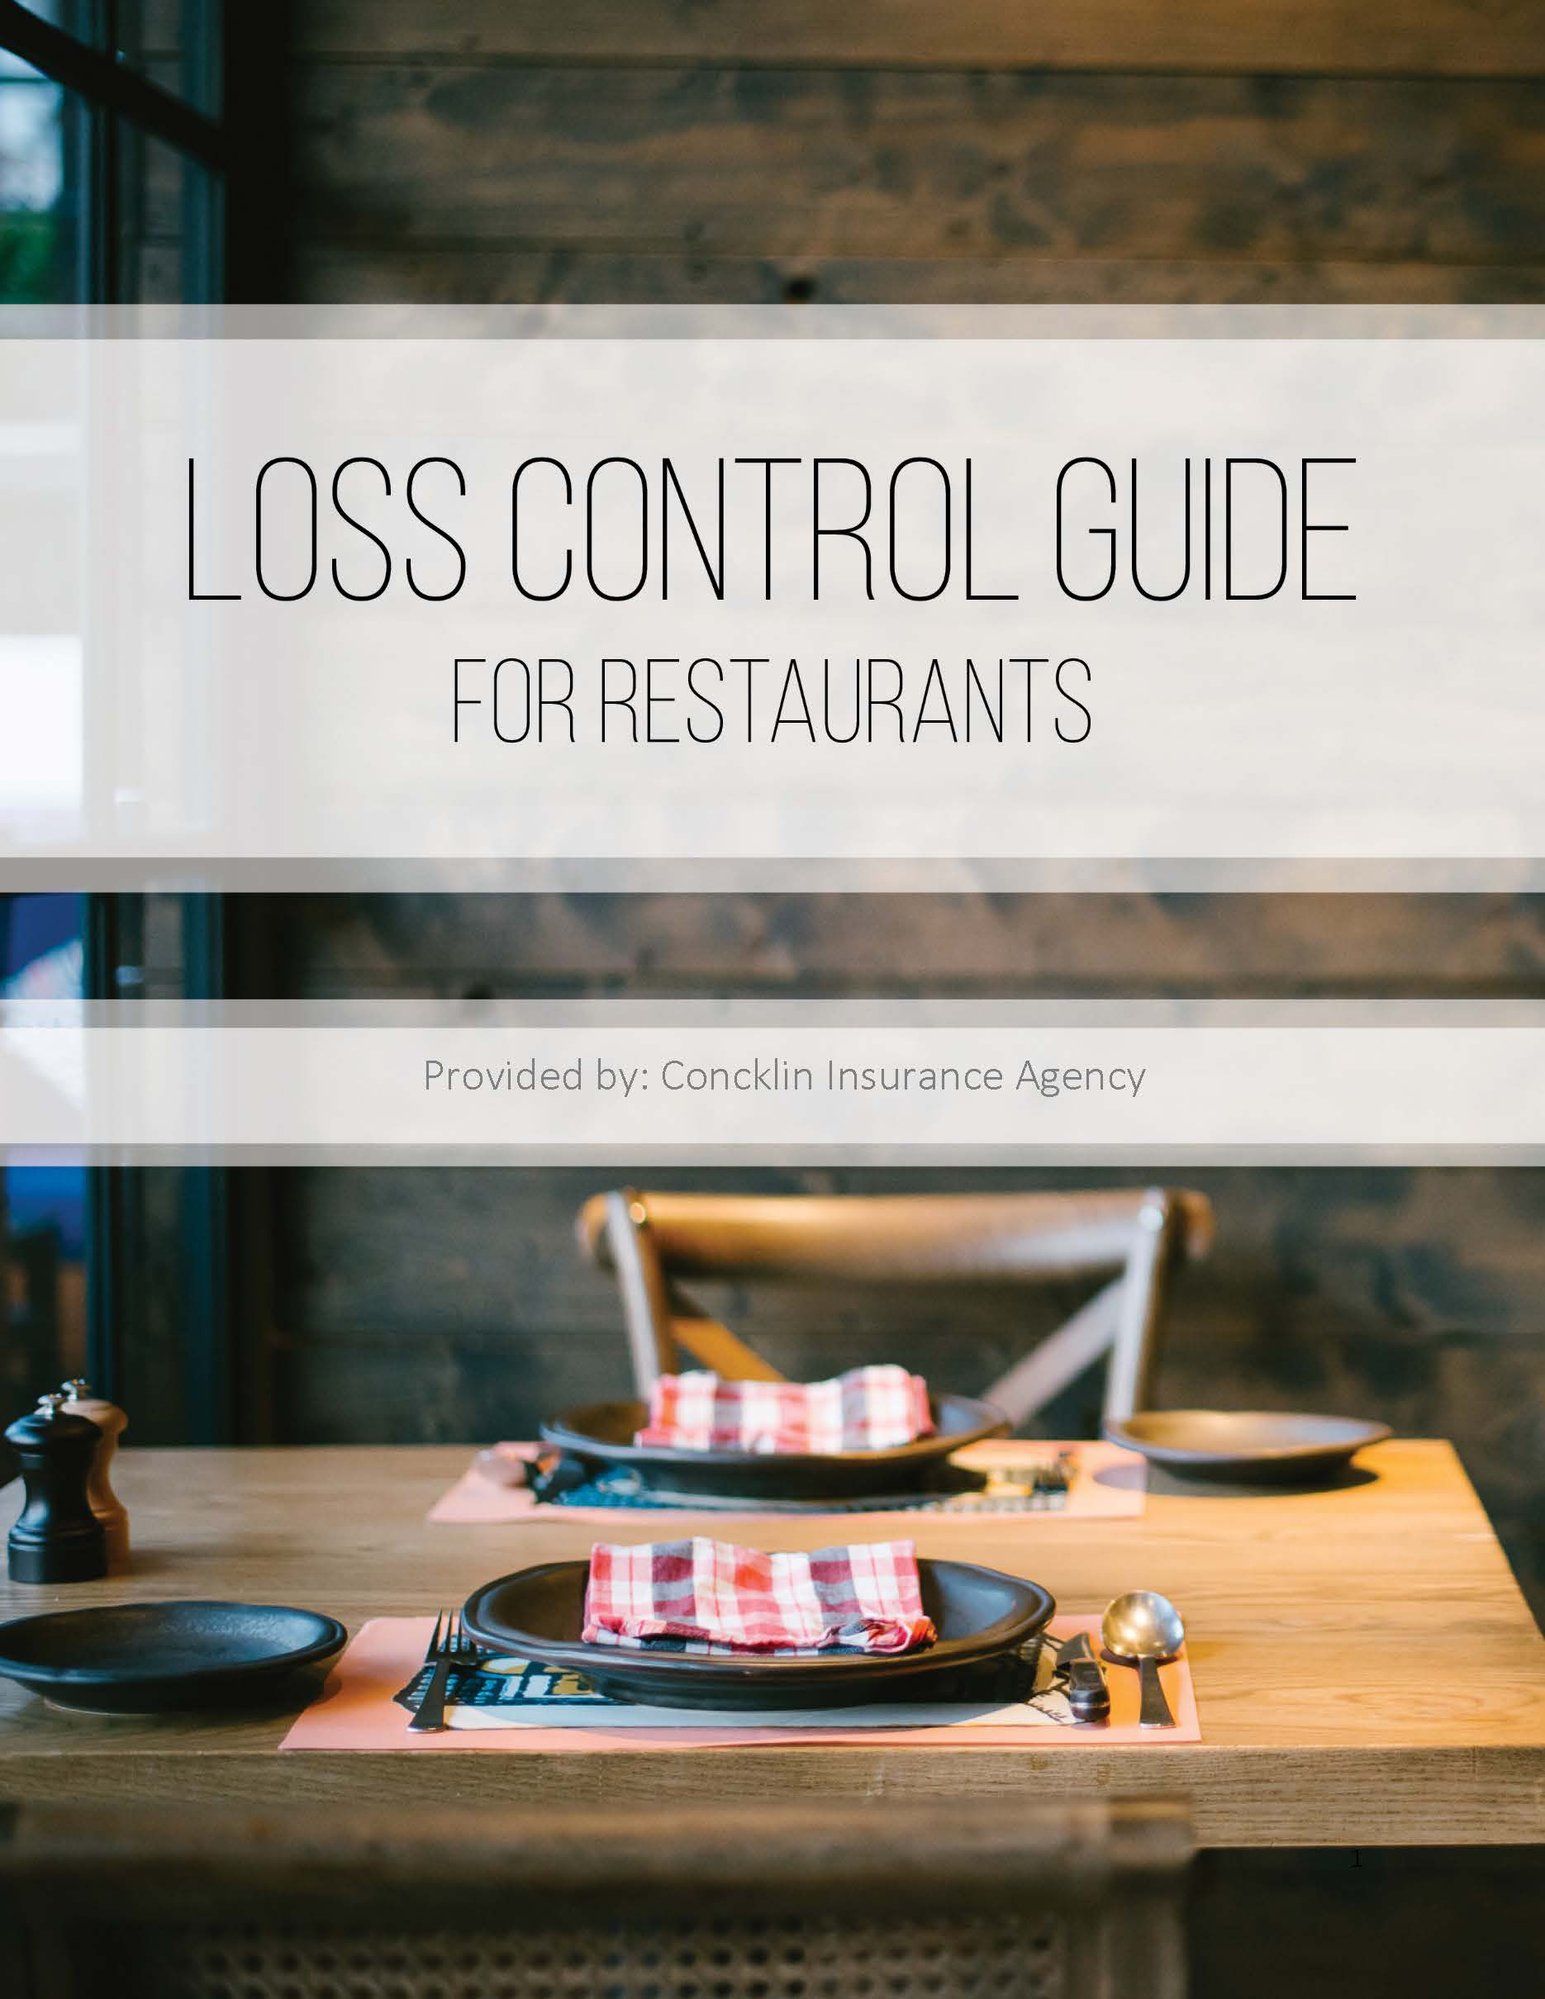 Loss Control Guide for Restaurants (1)_Page_01